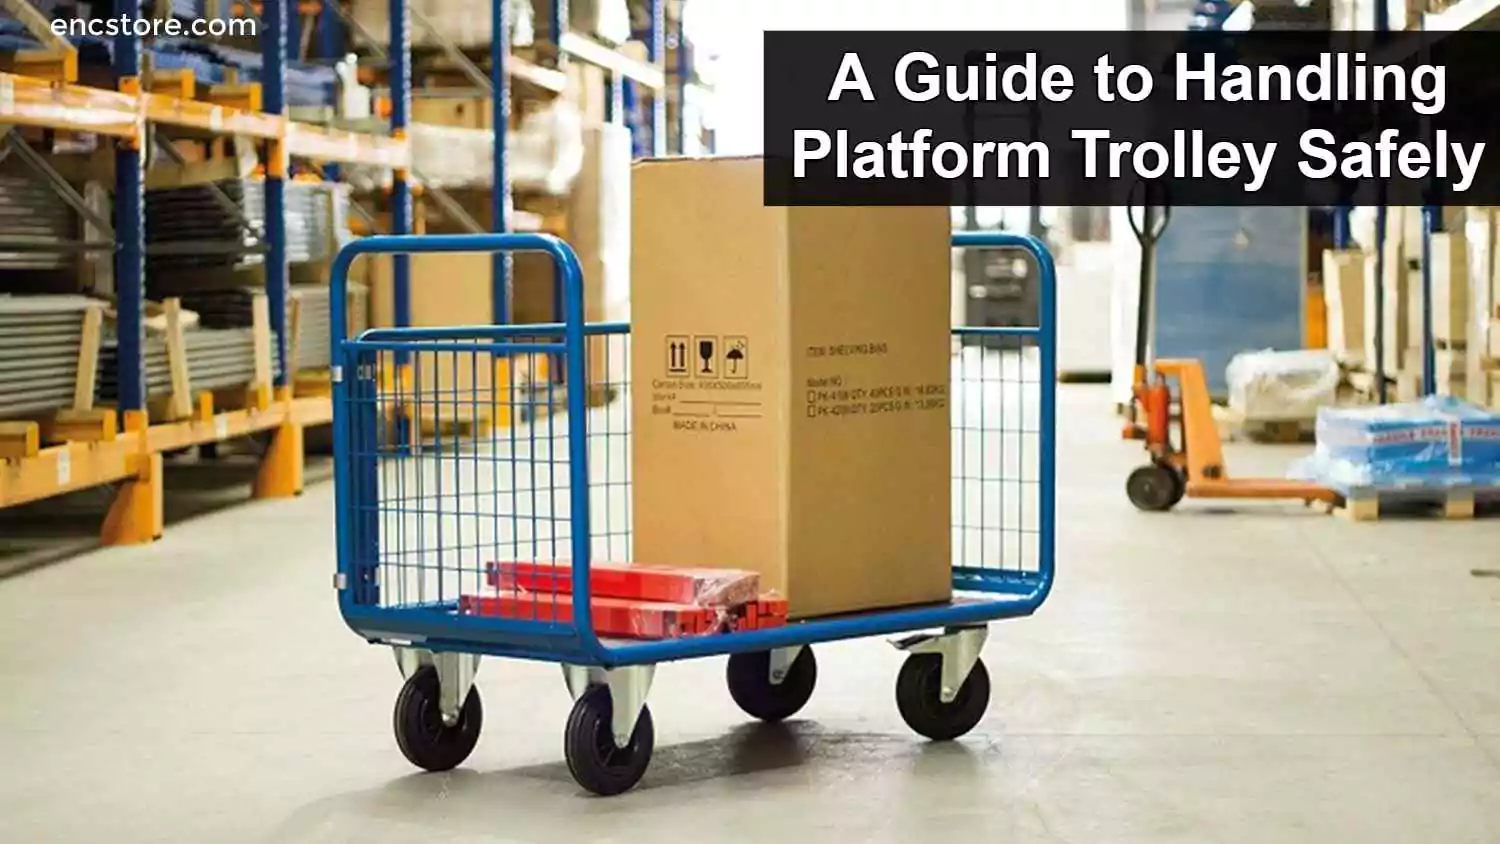 A Guide to Handling Platform Trolley Safely